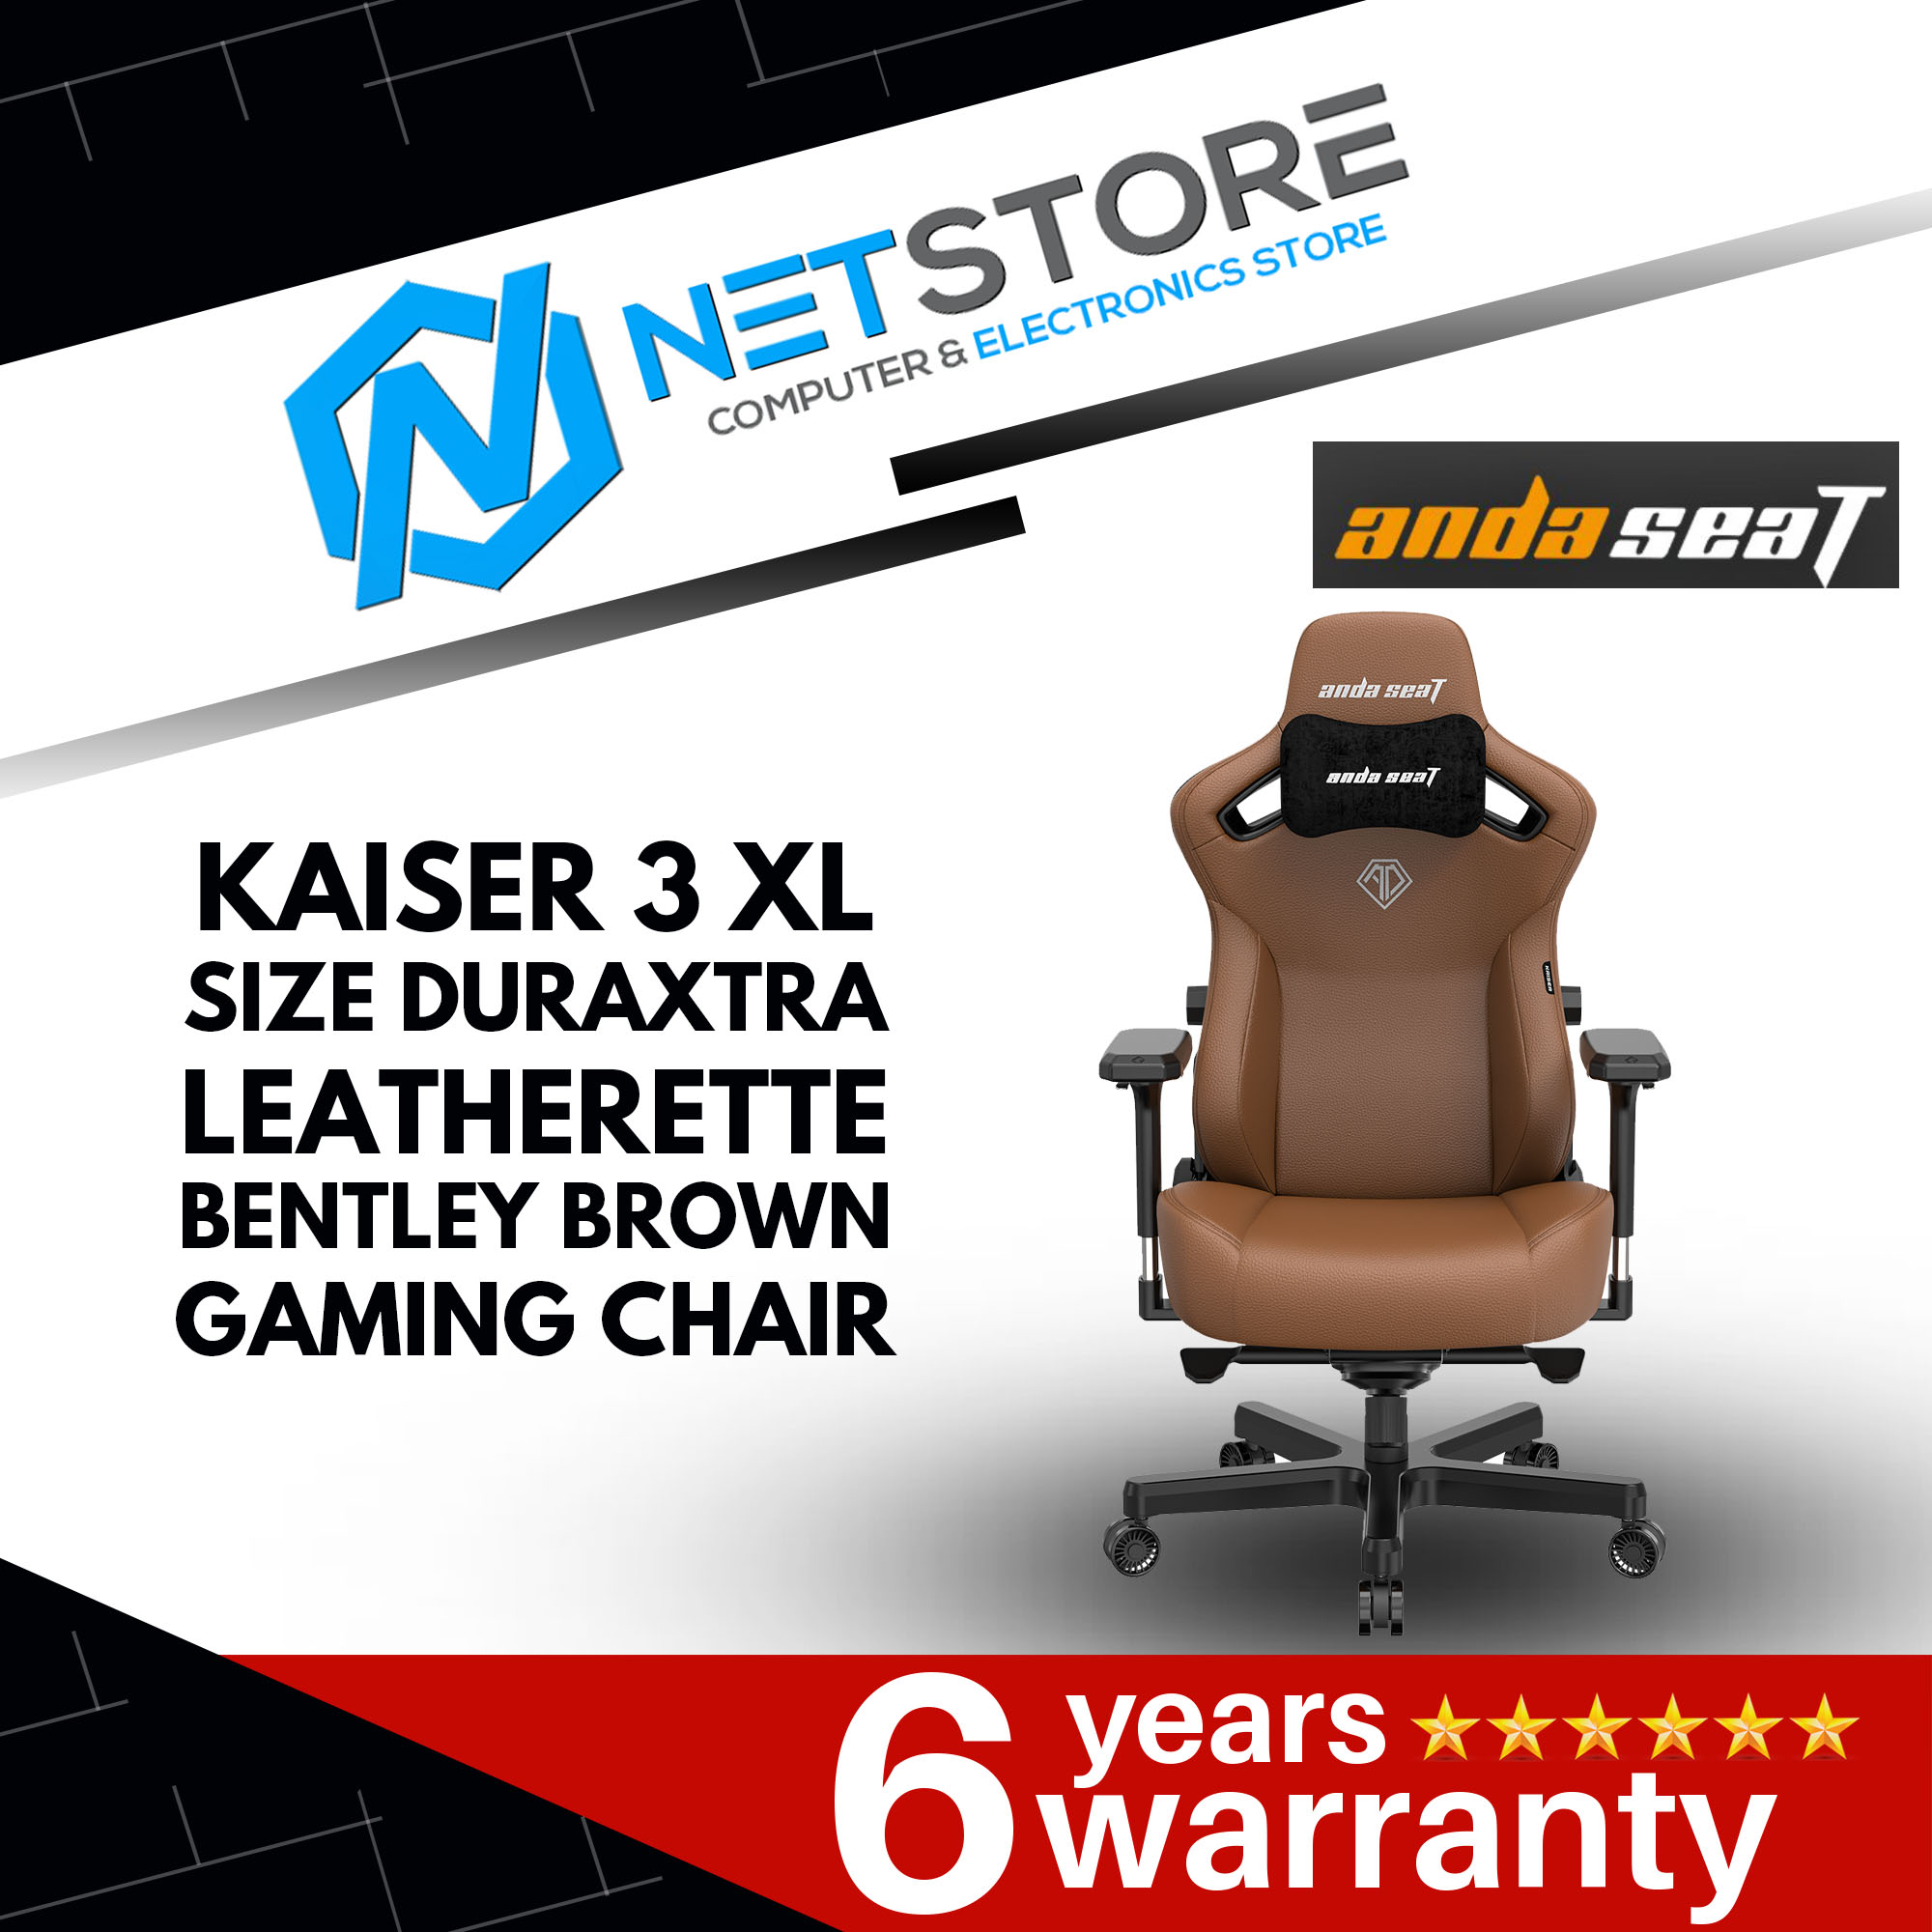 ANDA SEAT KAISER 3 XL SIZE DURAXTRA LEATHERETTE - BENTLEY BROWN